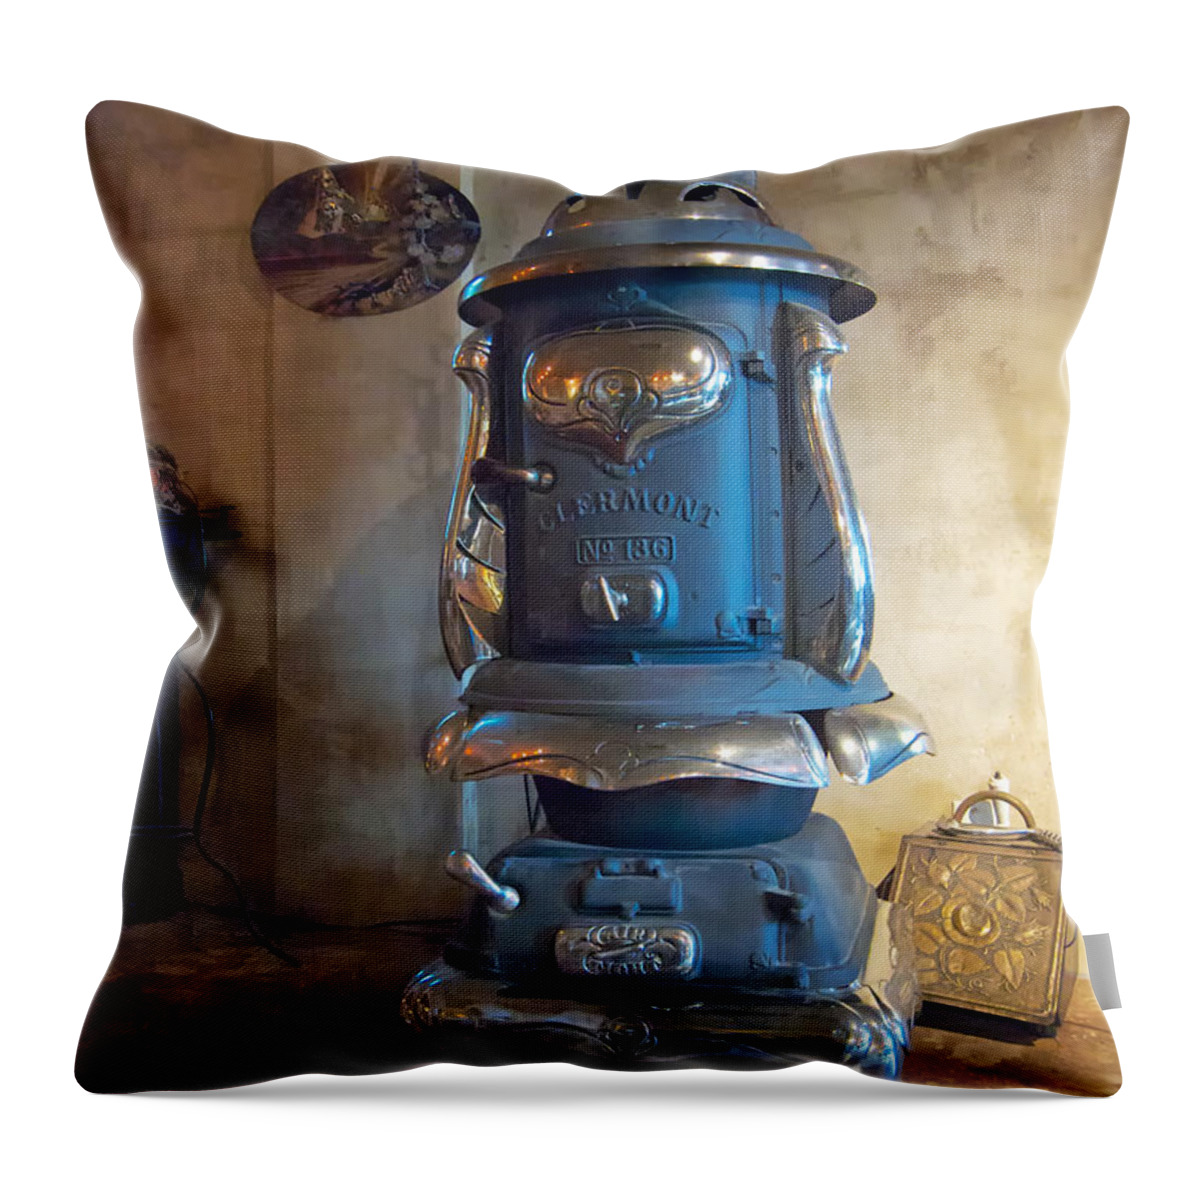 Pot-belly Throw Pillow featuring the photograph Clermont No 136 Pot Belly Stove by Mary Lee Dereske